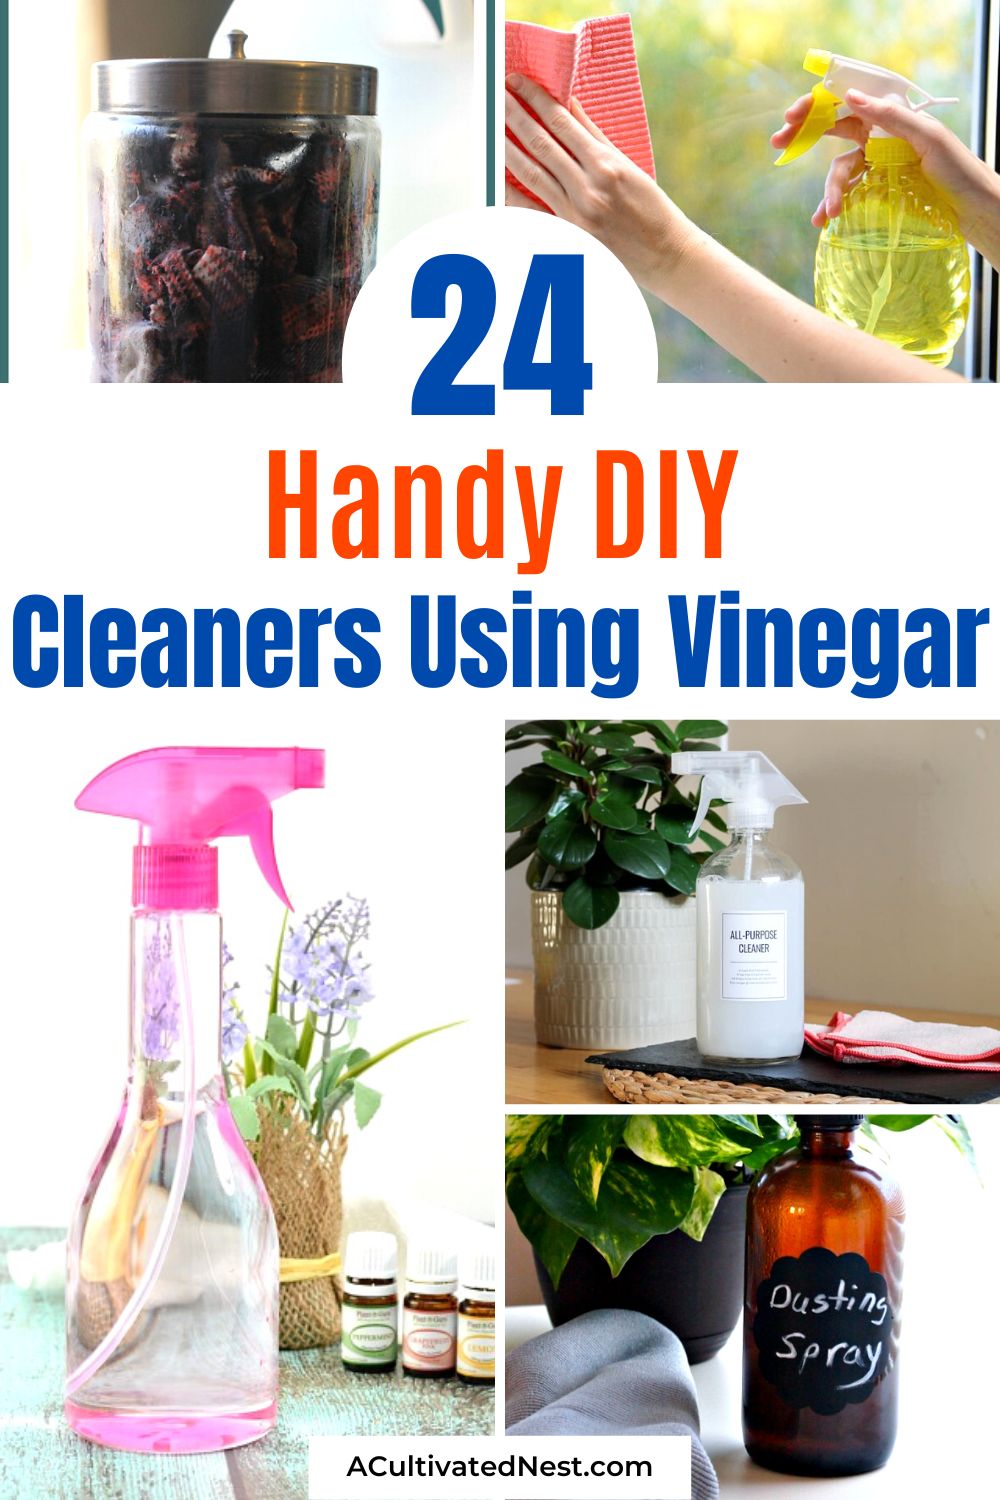 24 DIY Cleaners Using Vinegar- Say goodbye to harsh chemicals! Try these DIY cleaners using vinegar for a fresh, clean home. Easy, budget-friendly and environmentally friendly! | #DIY #CleaningHacks #NaturalCleaning #homemadeCleaners #ACultivatedNest